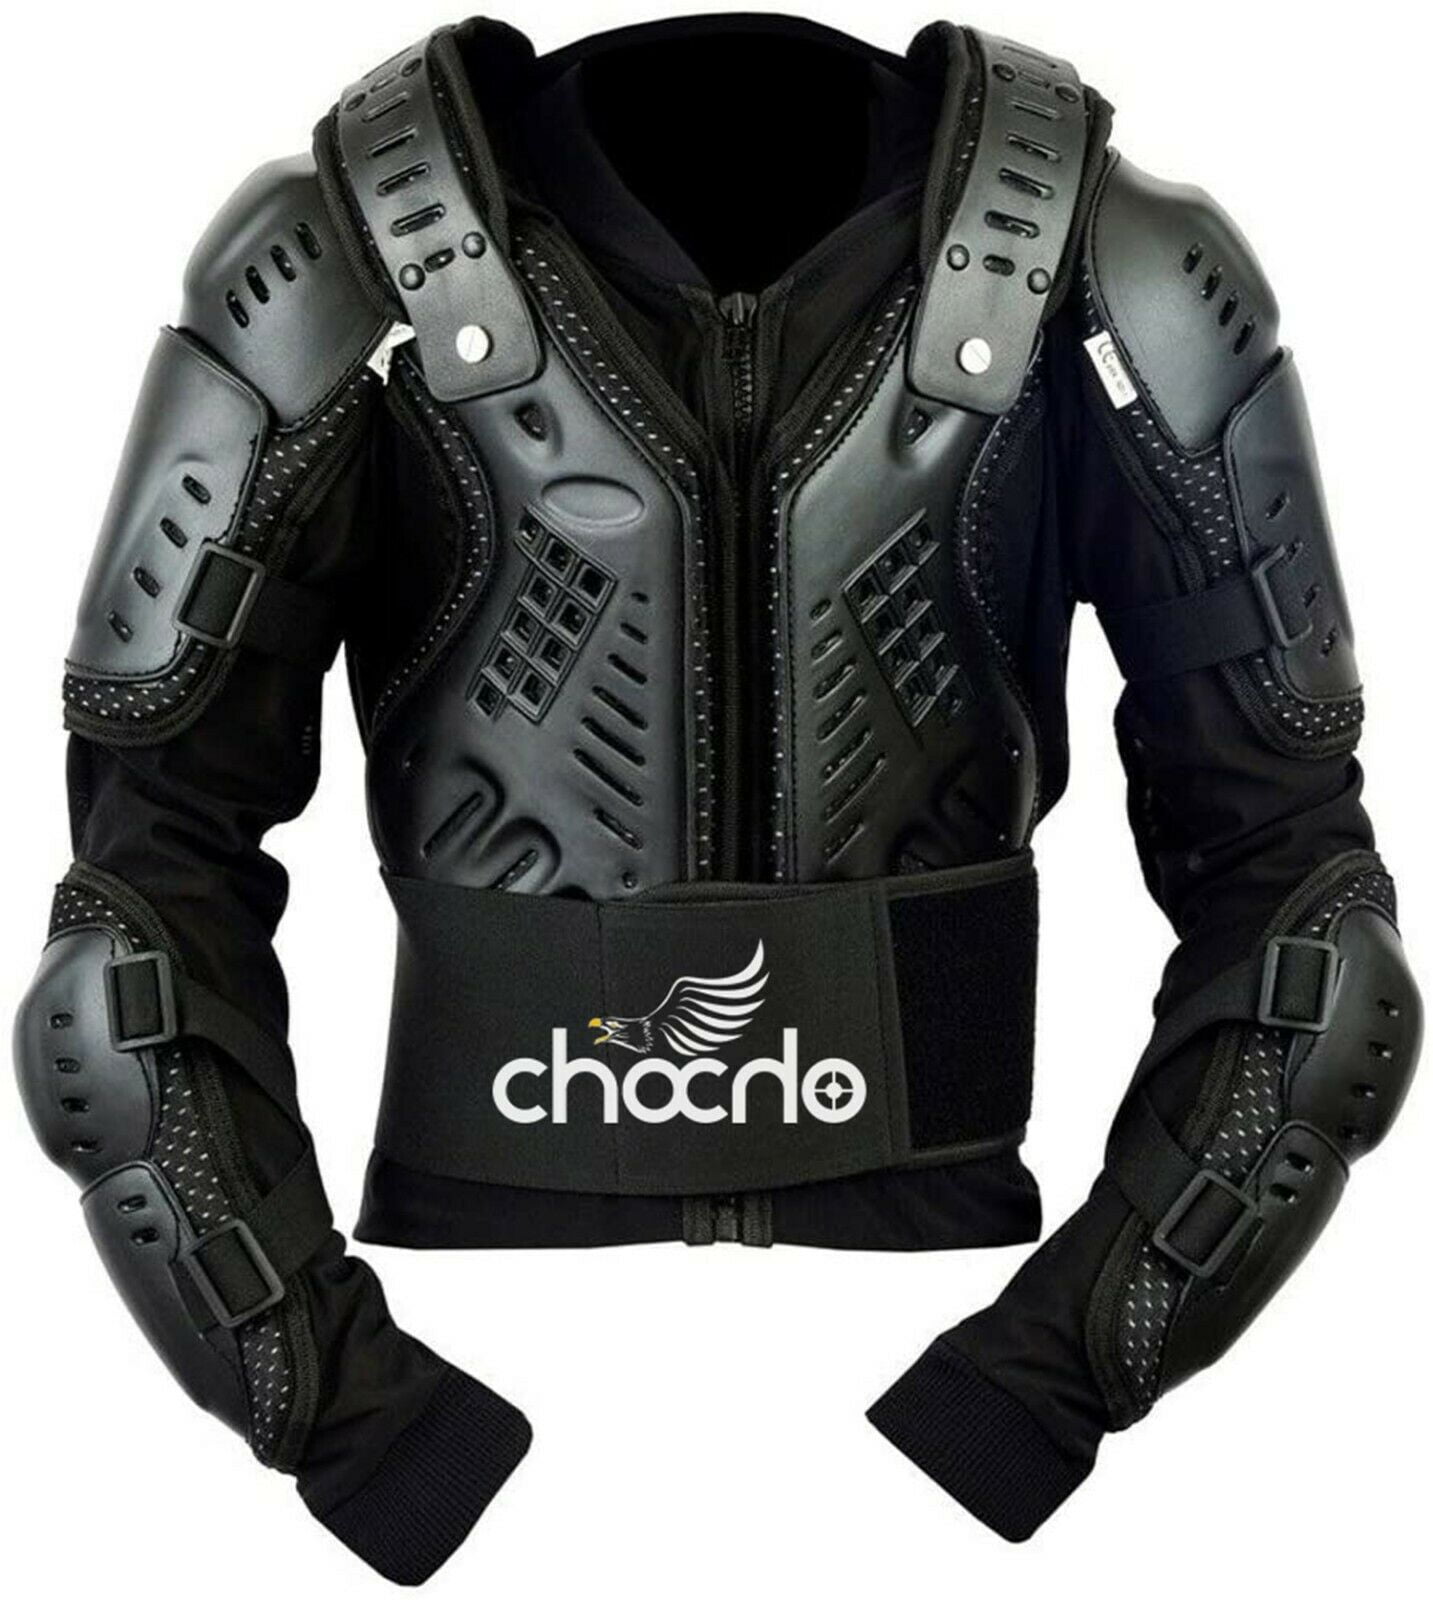 Knee Gurad Armoured Mountain Cycling Riding Skating Snowboarding Track Crash CE Approved Black Motocross Motorbike Body Armour Motorcycle Protection Jacket 